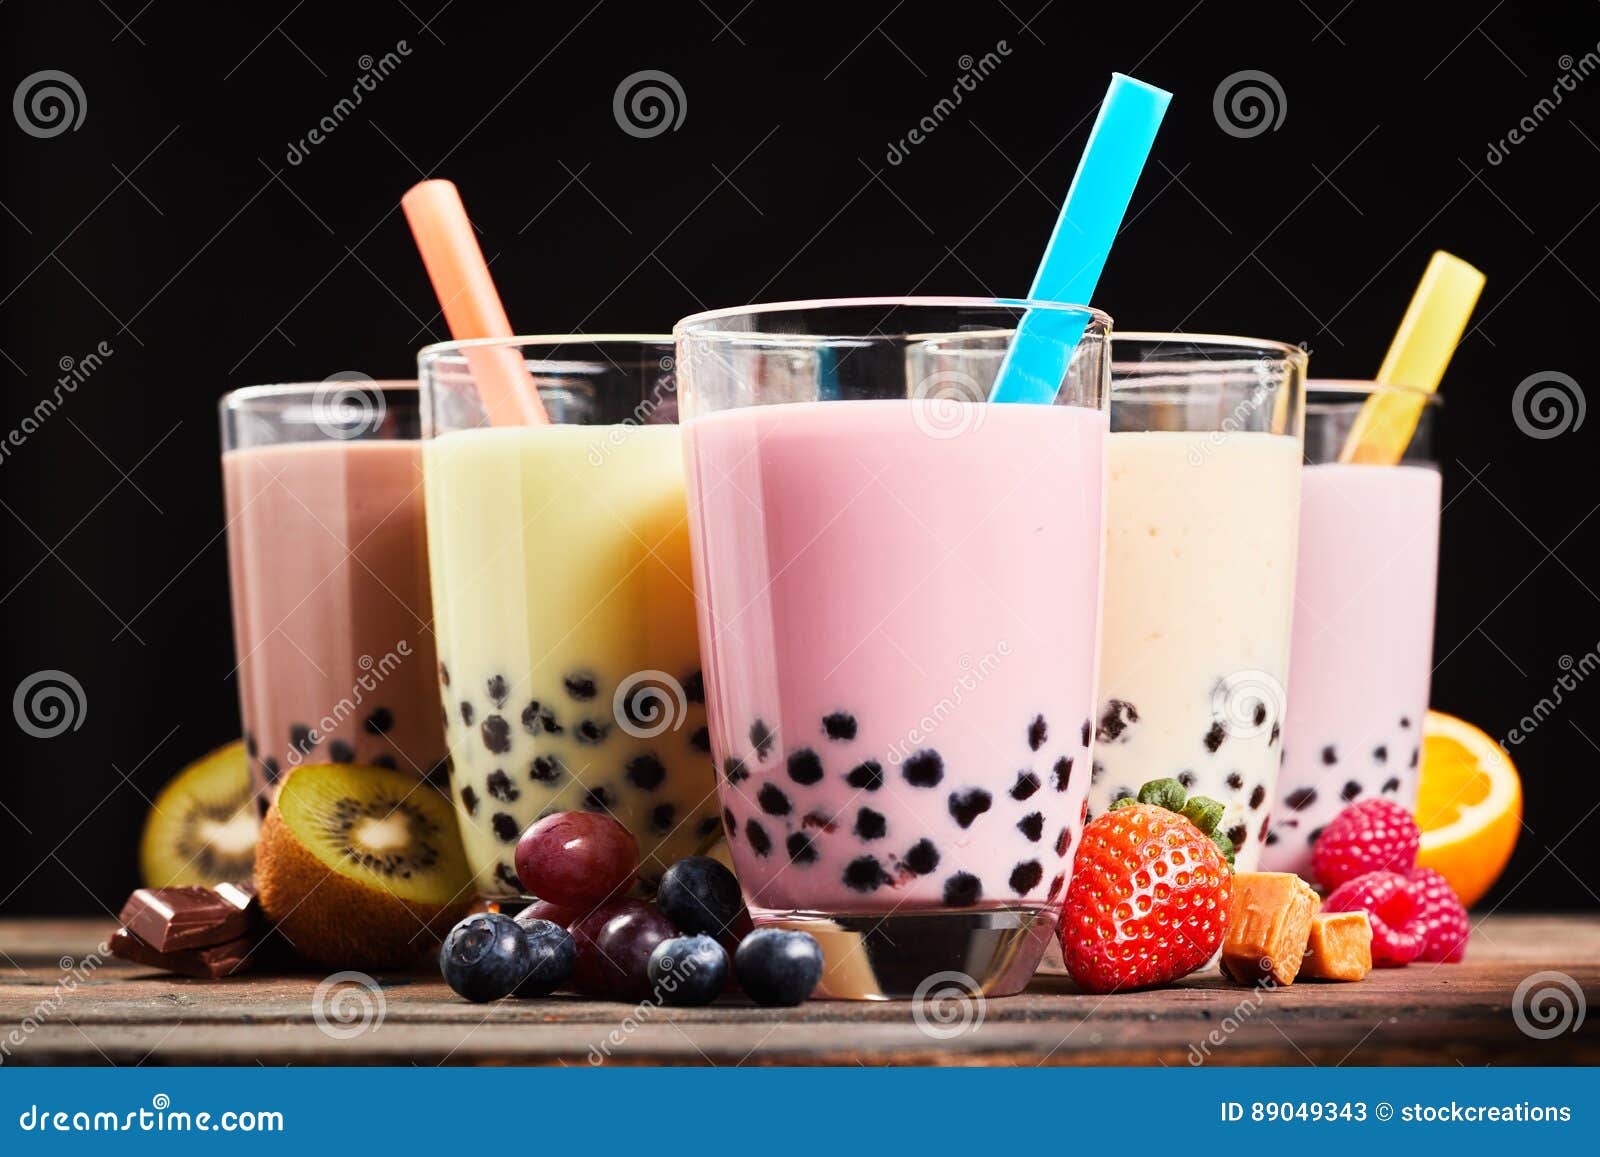 https://thumbs.dreamstime.com/z/glasses-refreshing-milky-boba-bubble-tea-assorted-fresh-fruit-ingredients-chocolate-caramel-candy-used-as-flavoring-89049343.jpg